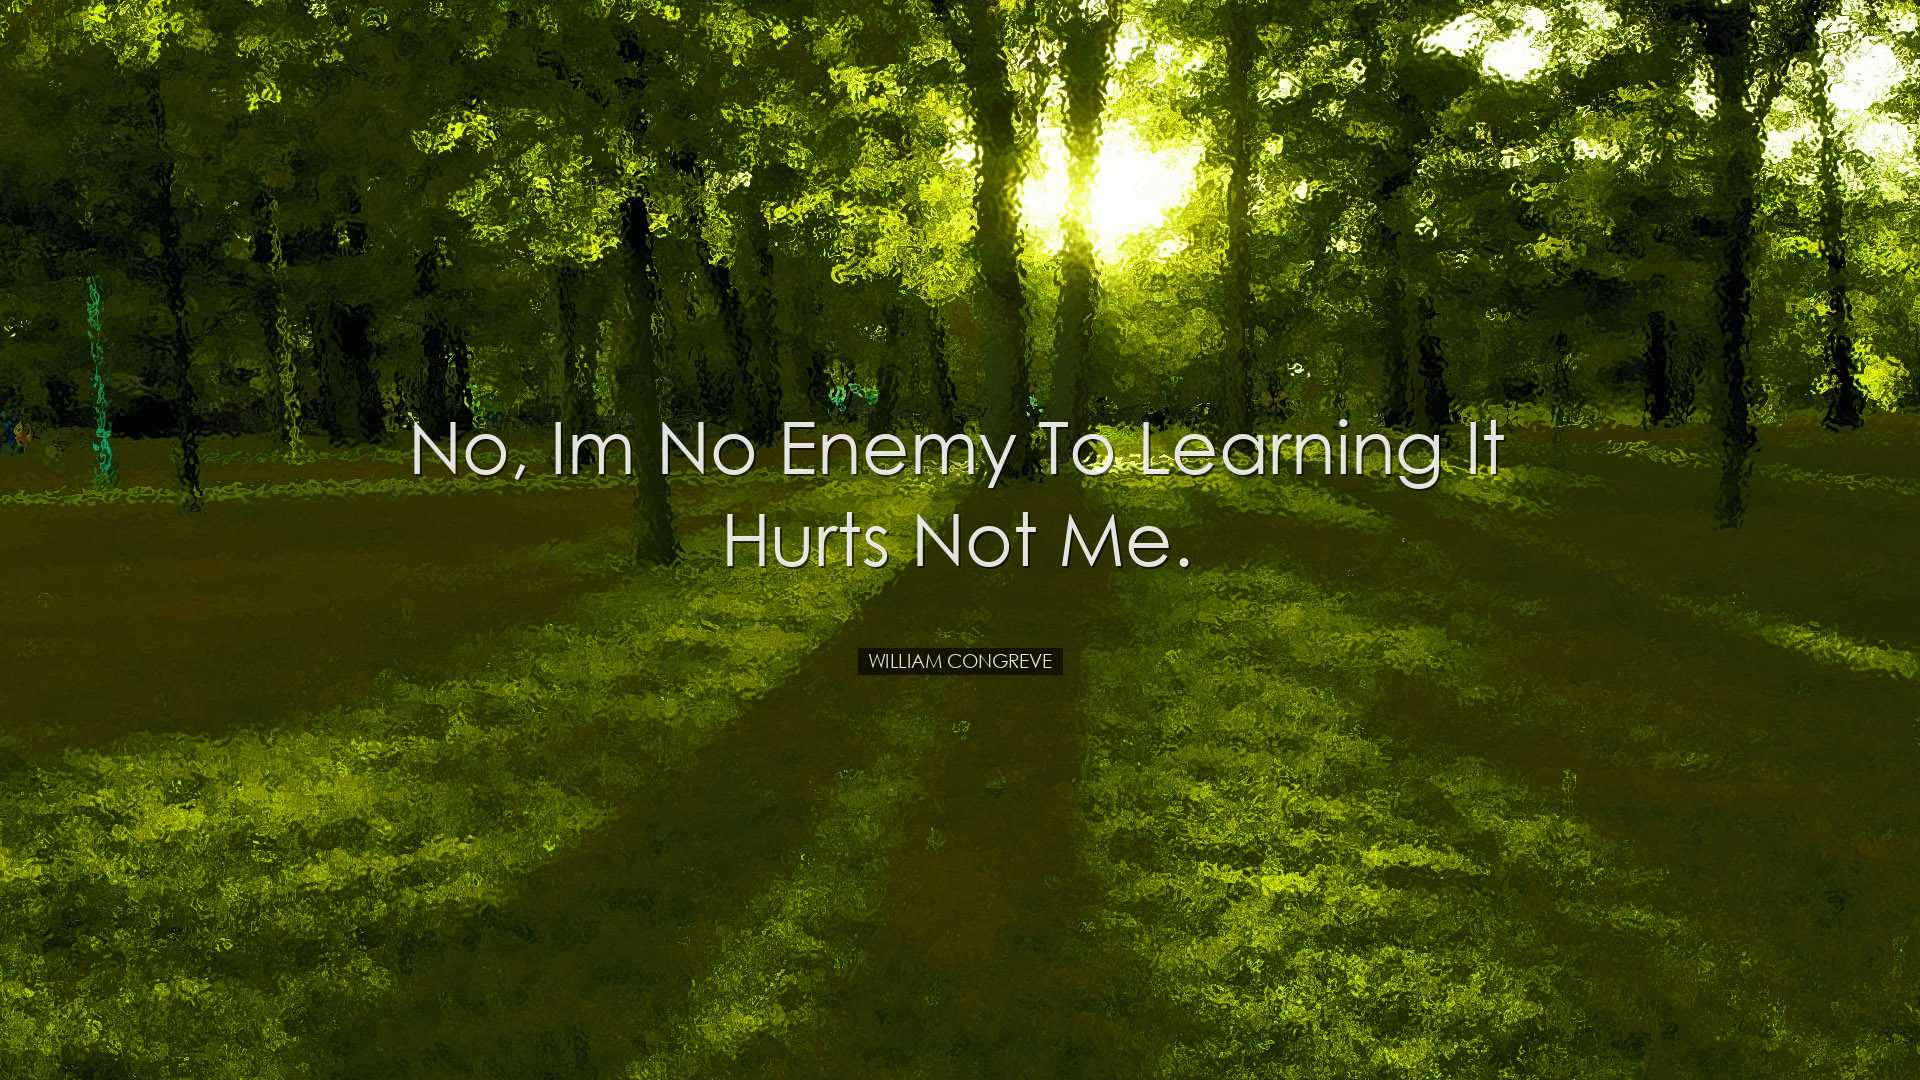 No, Im no enemy to learning it hurts not me. - William Congreve